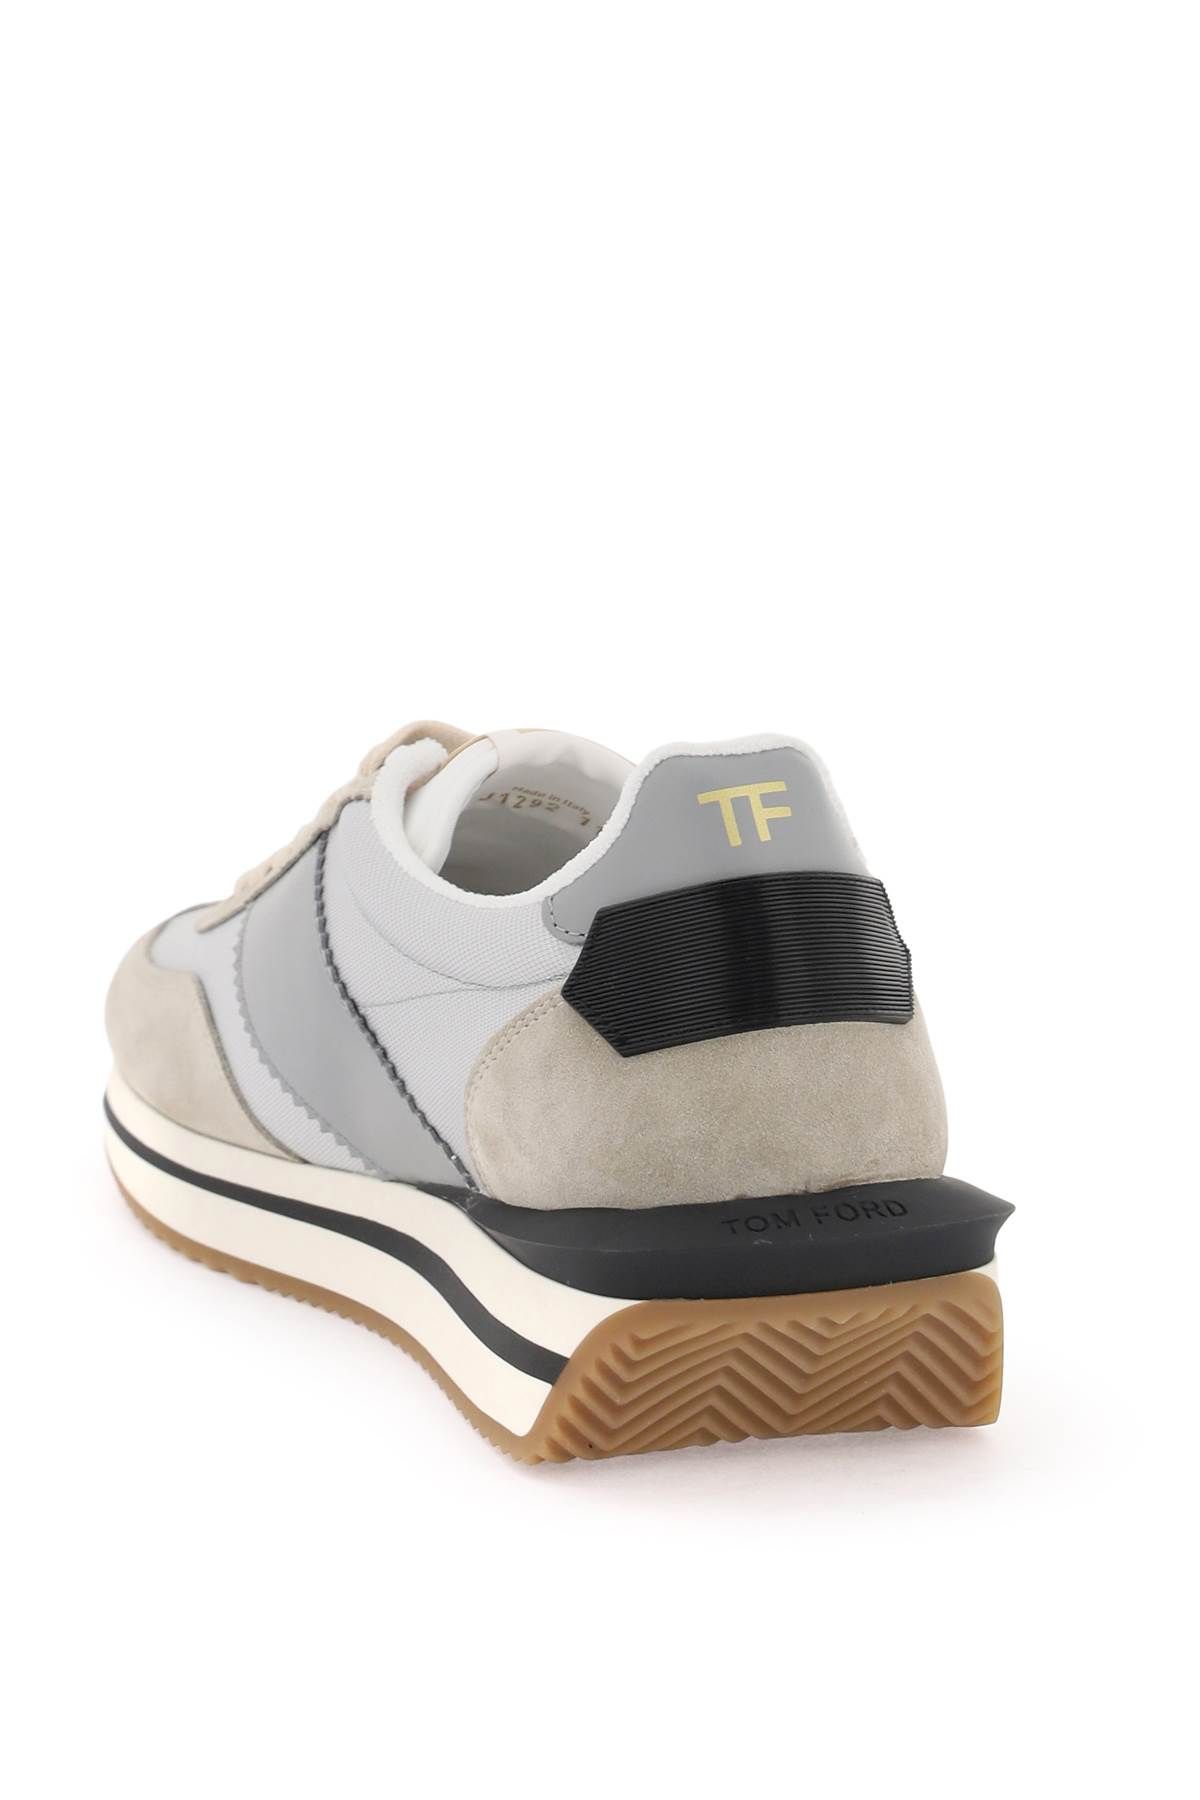 Shop Tom Ford James Sneakers In Lycra And Suede Leather In Beige,grey